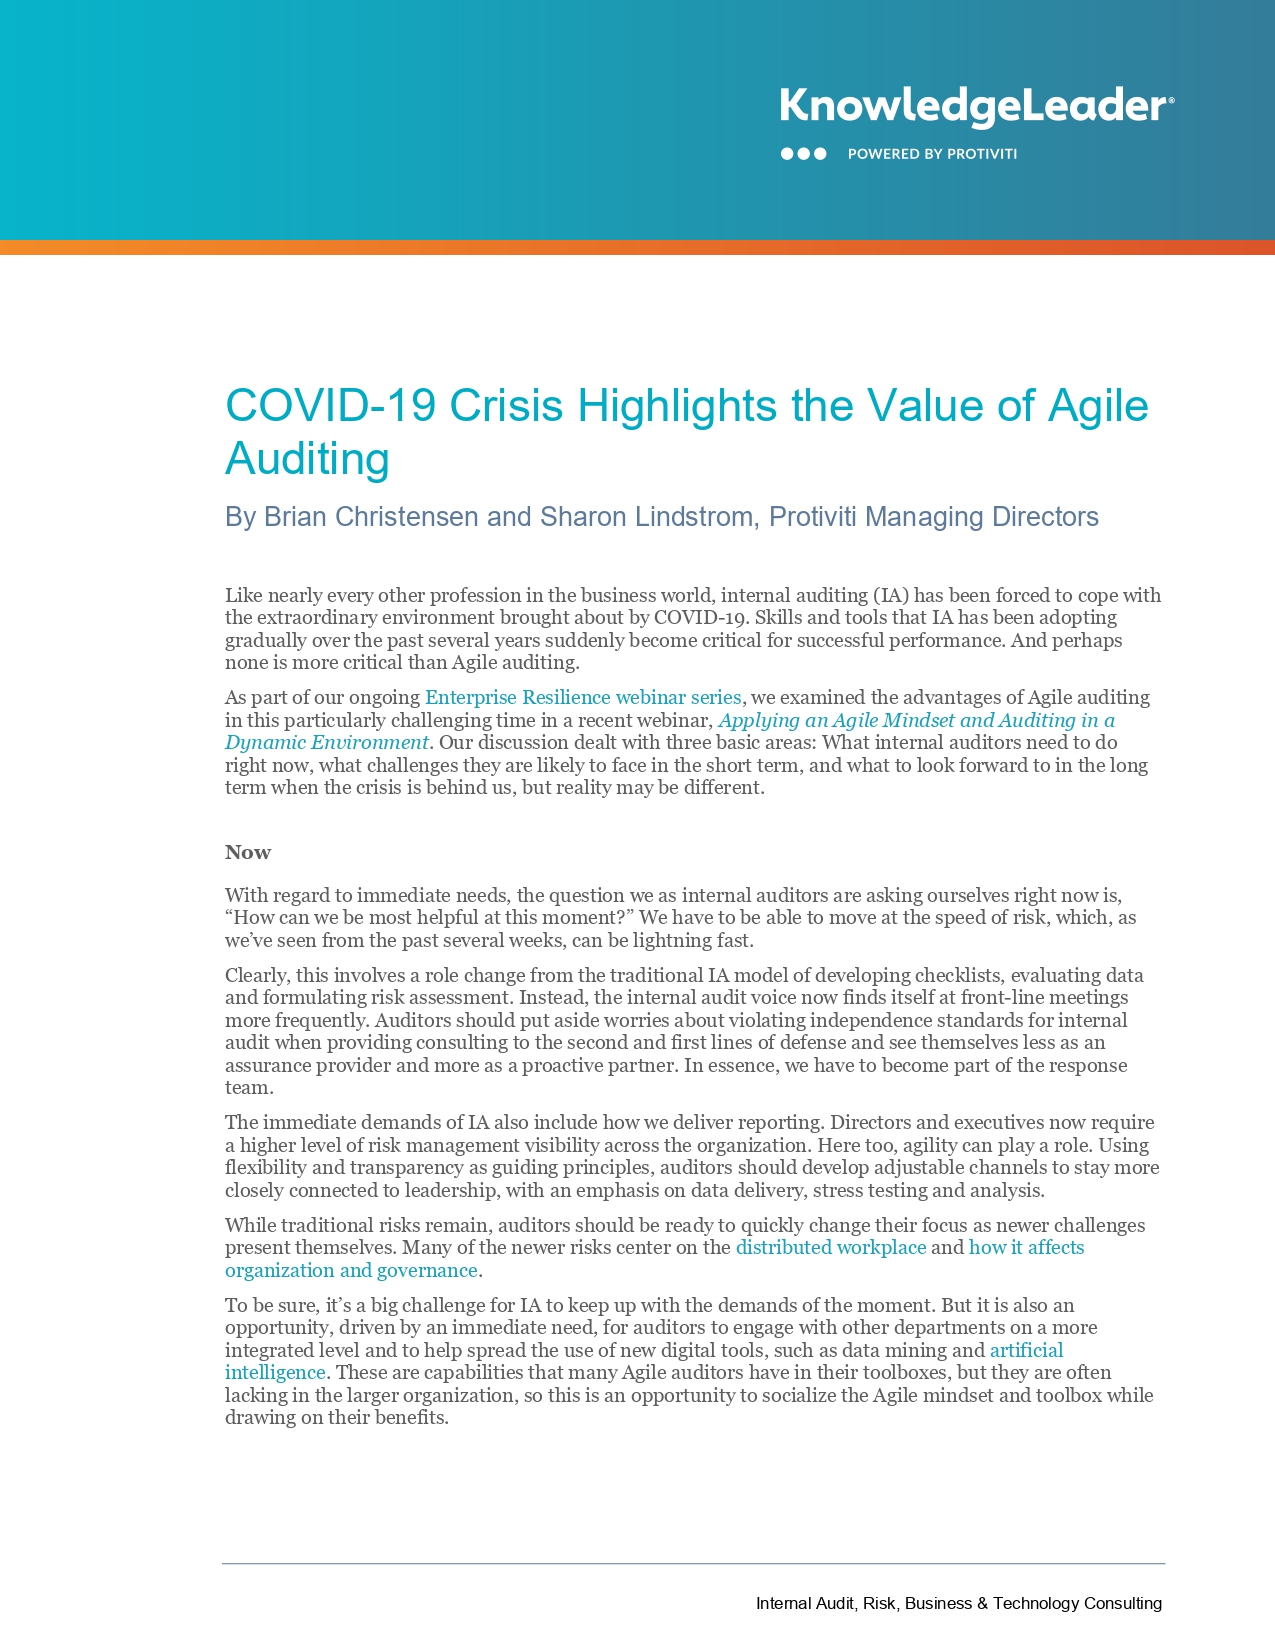 COVID-19 Crisis Highlights the Value of Agile Auditing